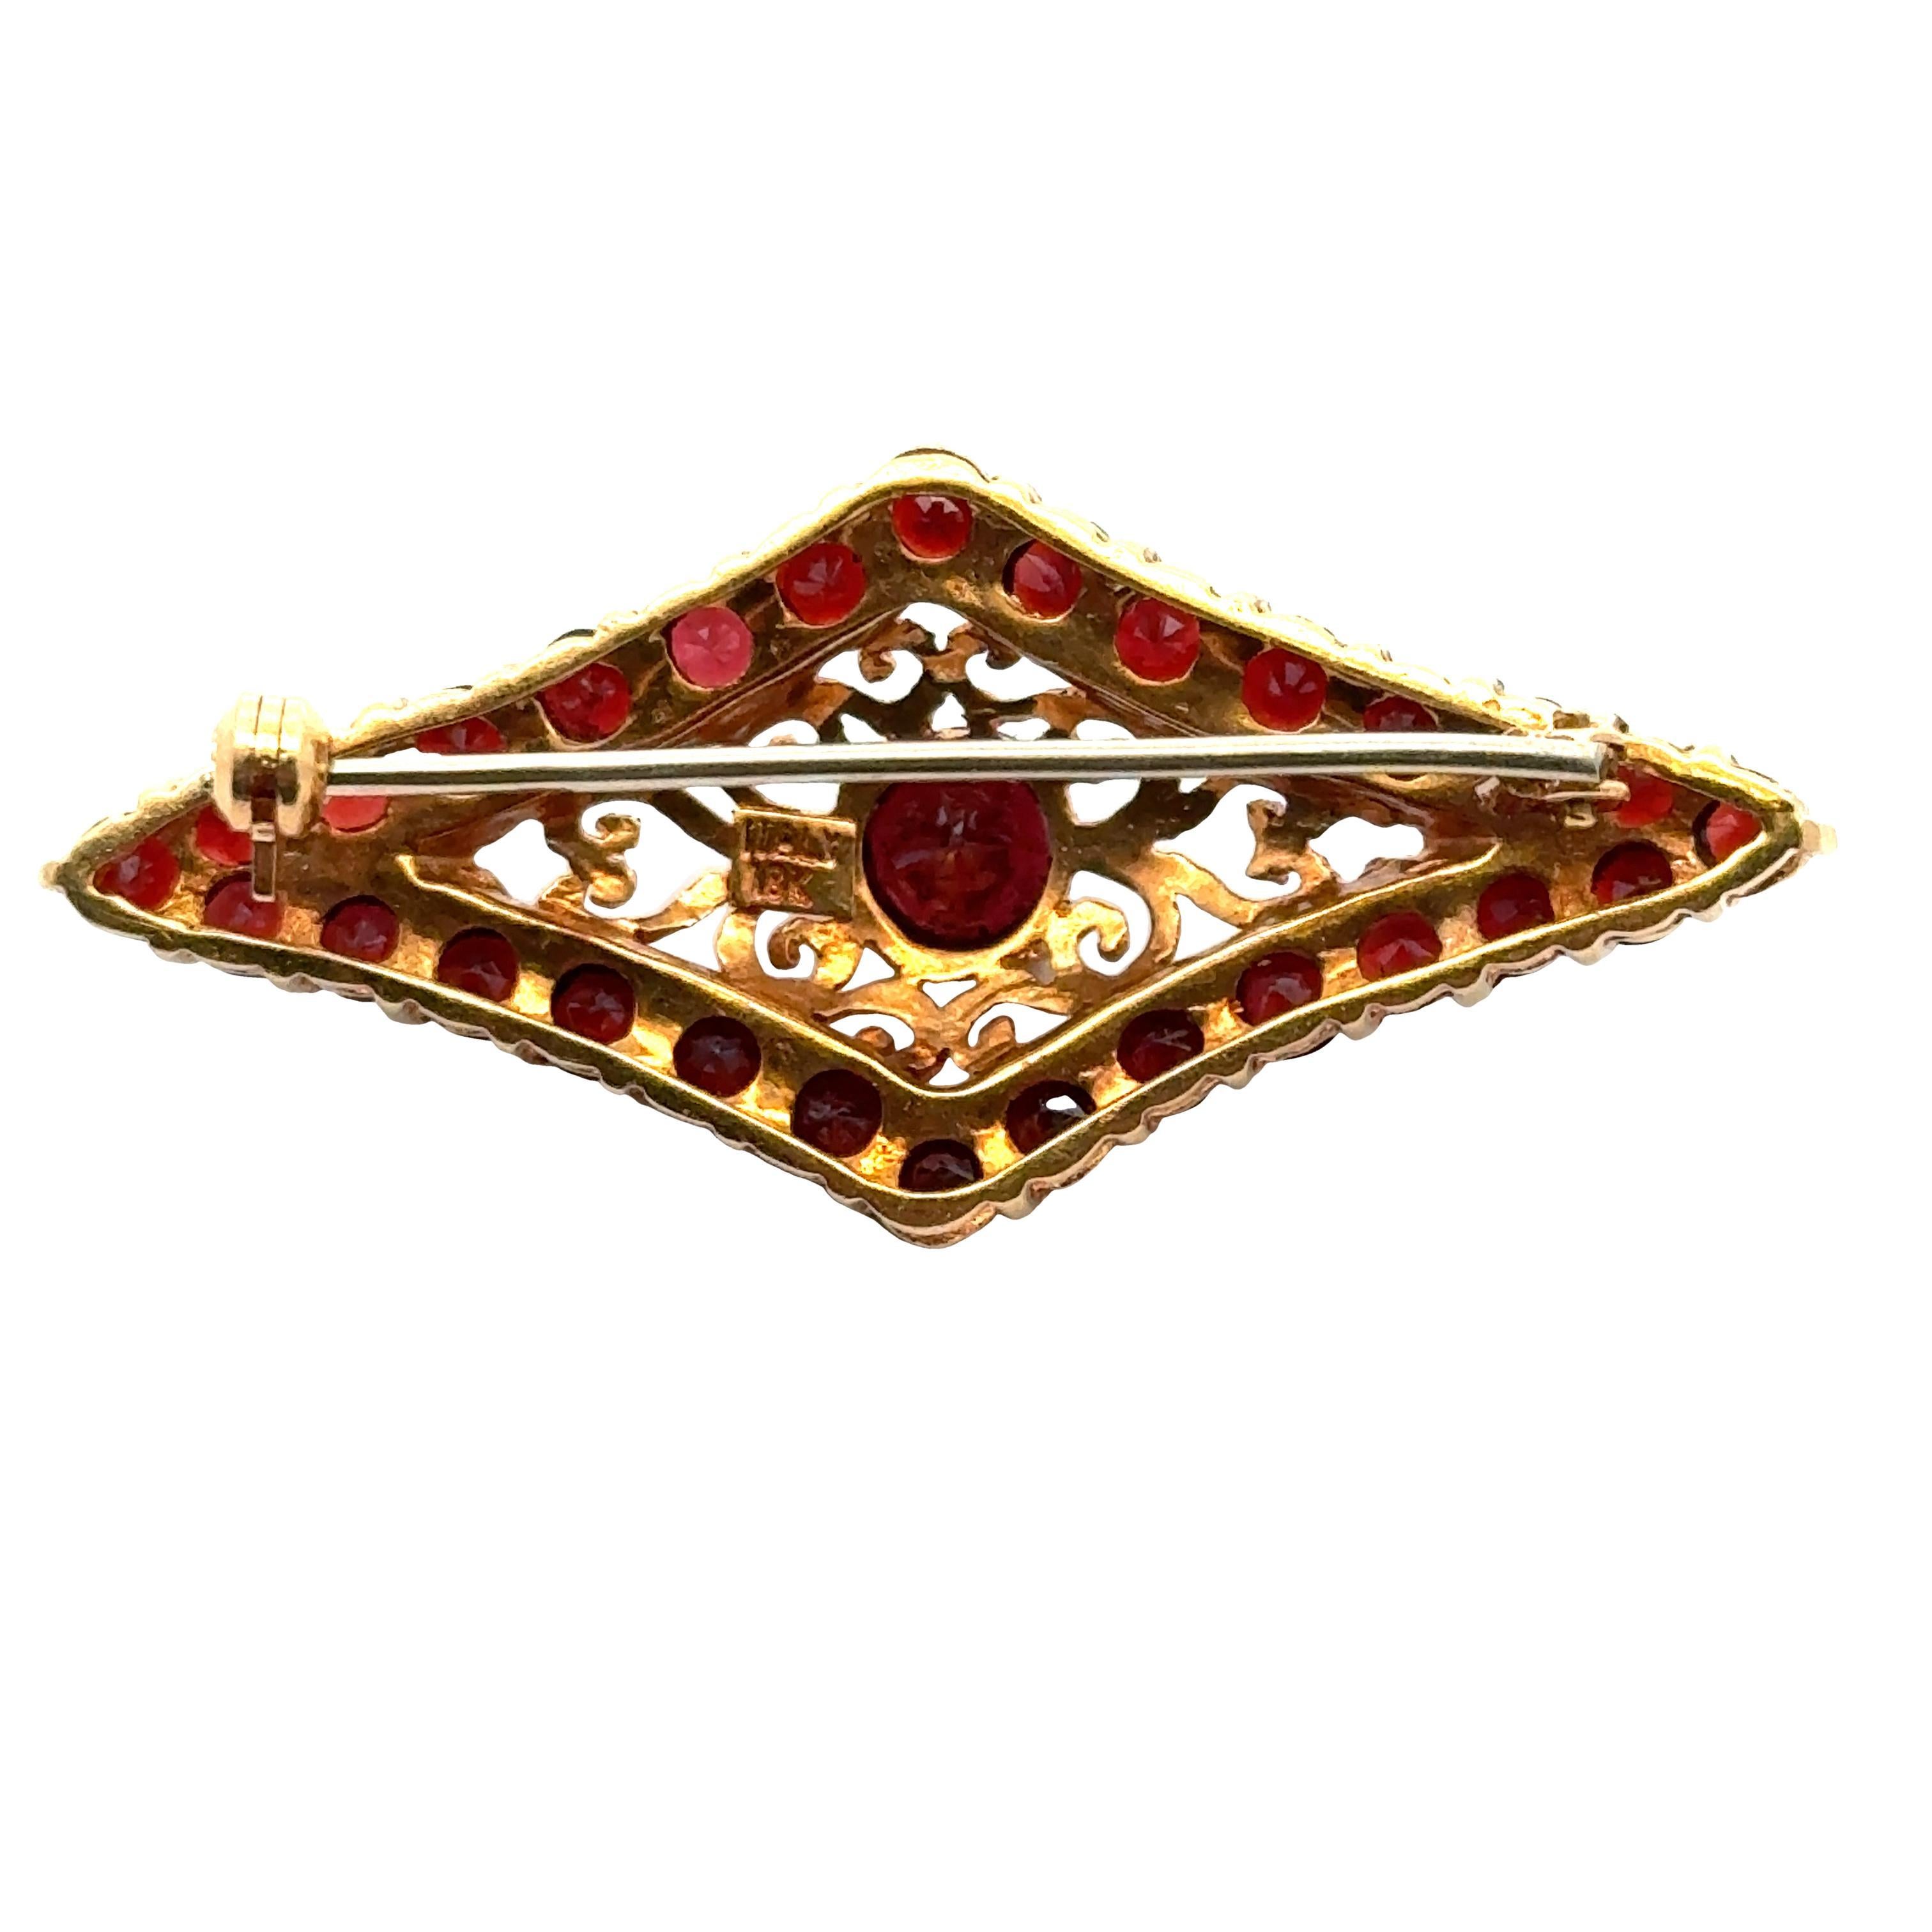 1950's garnet gemstone brooch handcrafted in 18 karat yellow gold. The decorative textured gold brooch features round garnet gemstones outlining the piece and one set in the center. The pin measures .75 x 2.00 inches. Weight:8.9 grams.